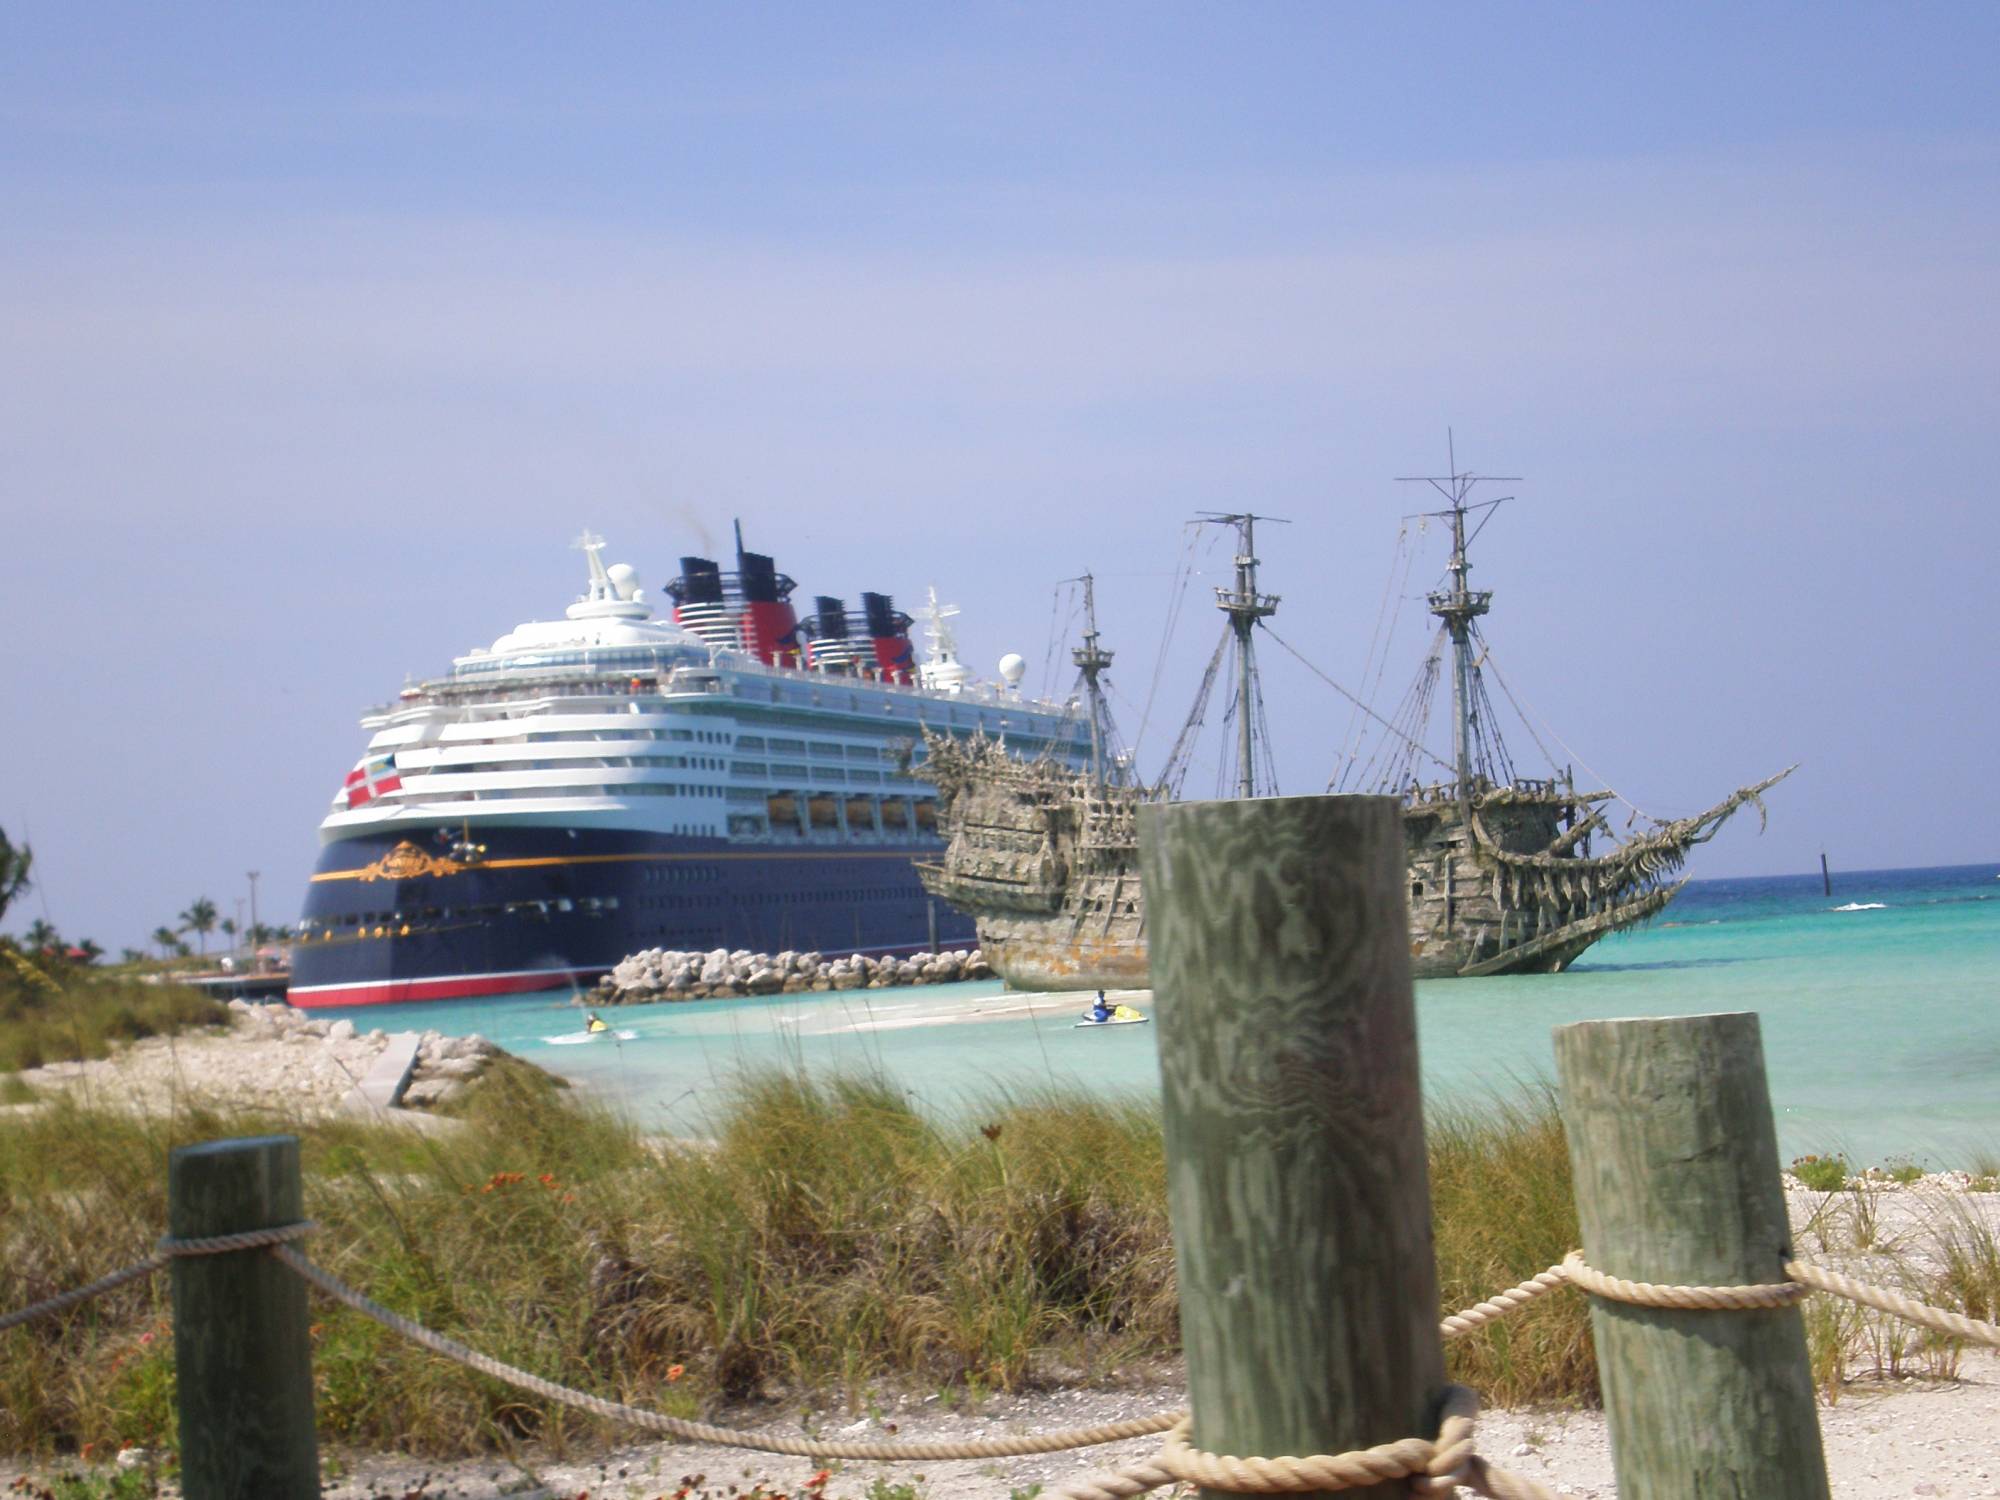 Castaway Cay Pirates of the Caribbean Ship and the Wonder